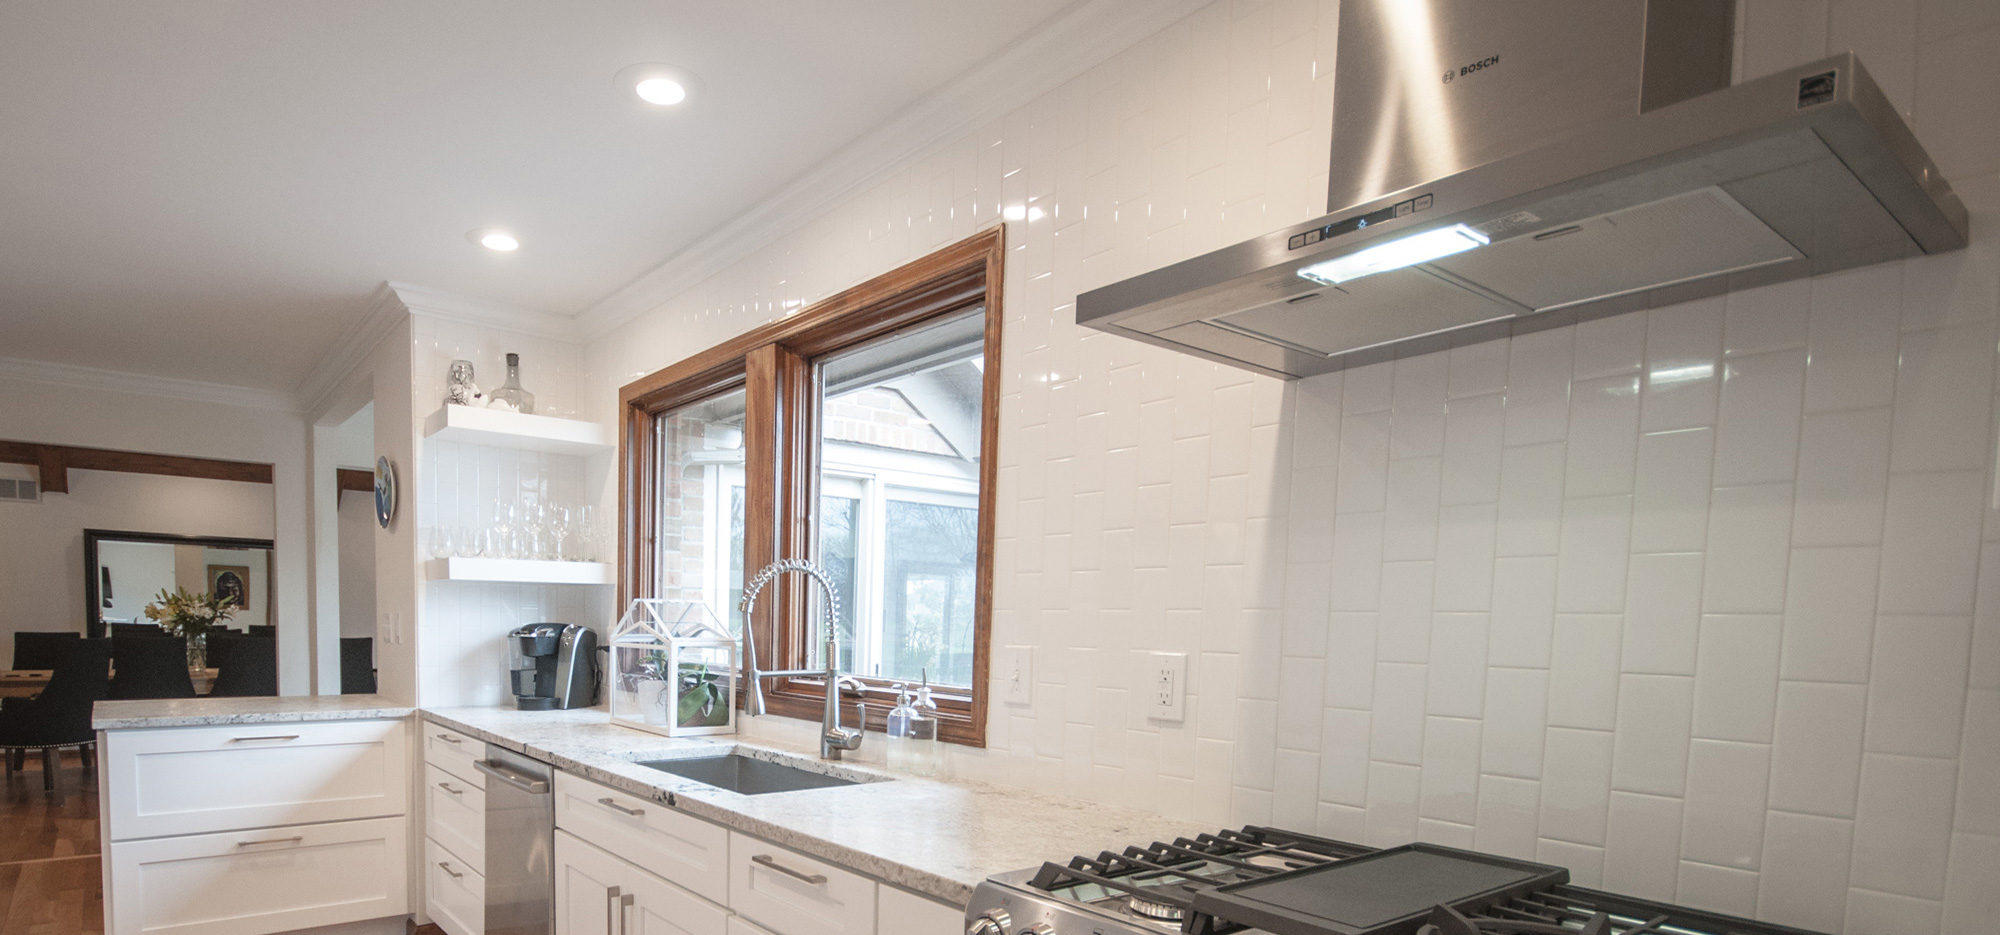 3 Types of Lighting You Need in Your Kitchen